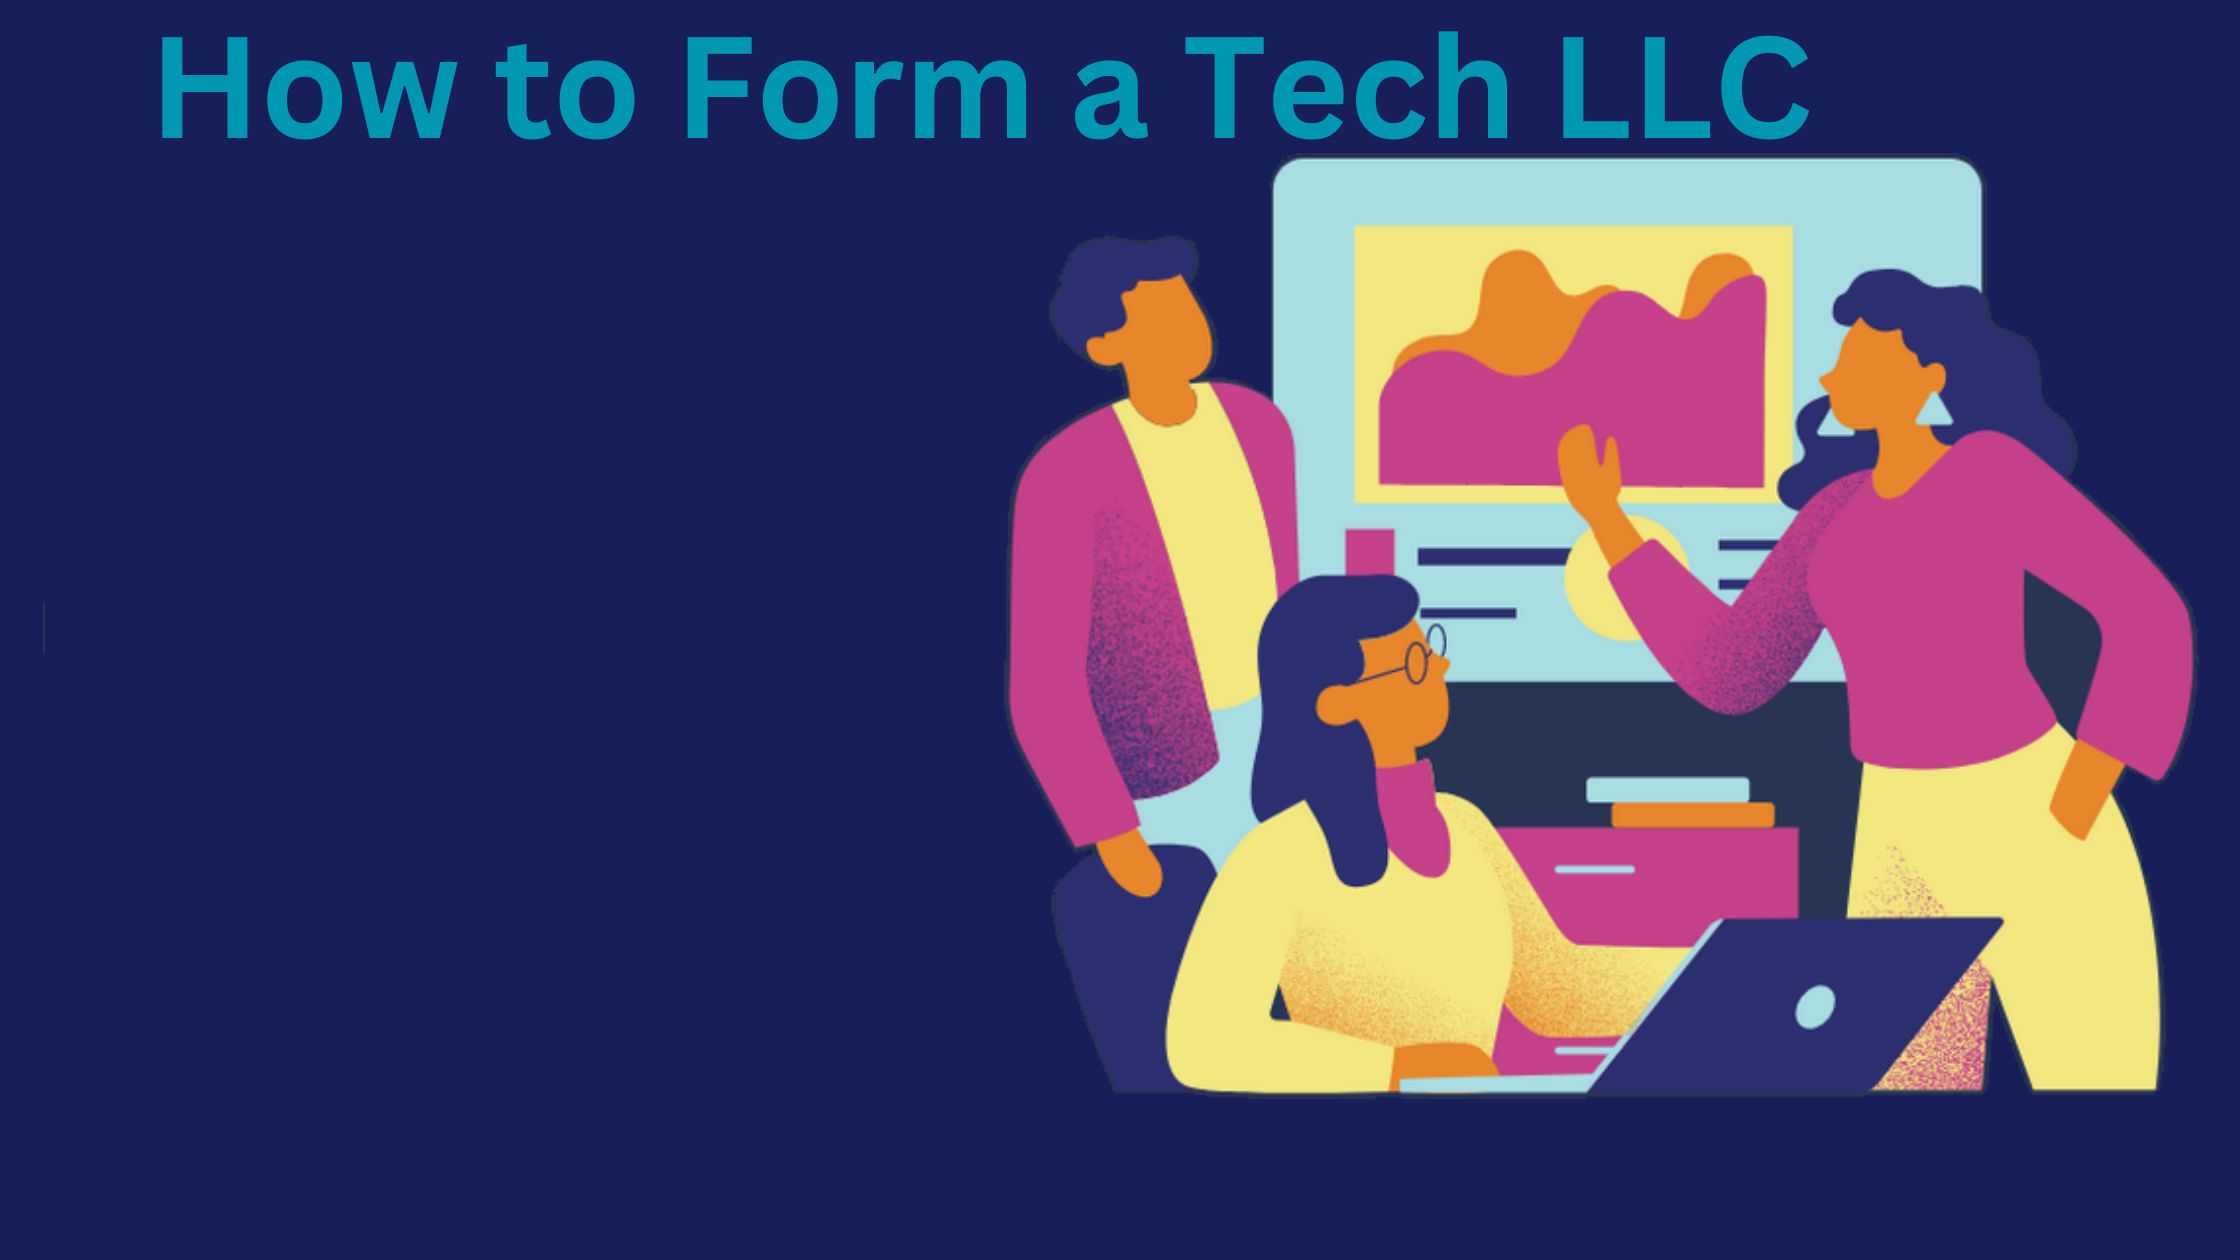 How to Form a Tech LLC